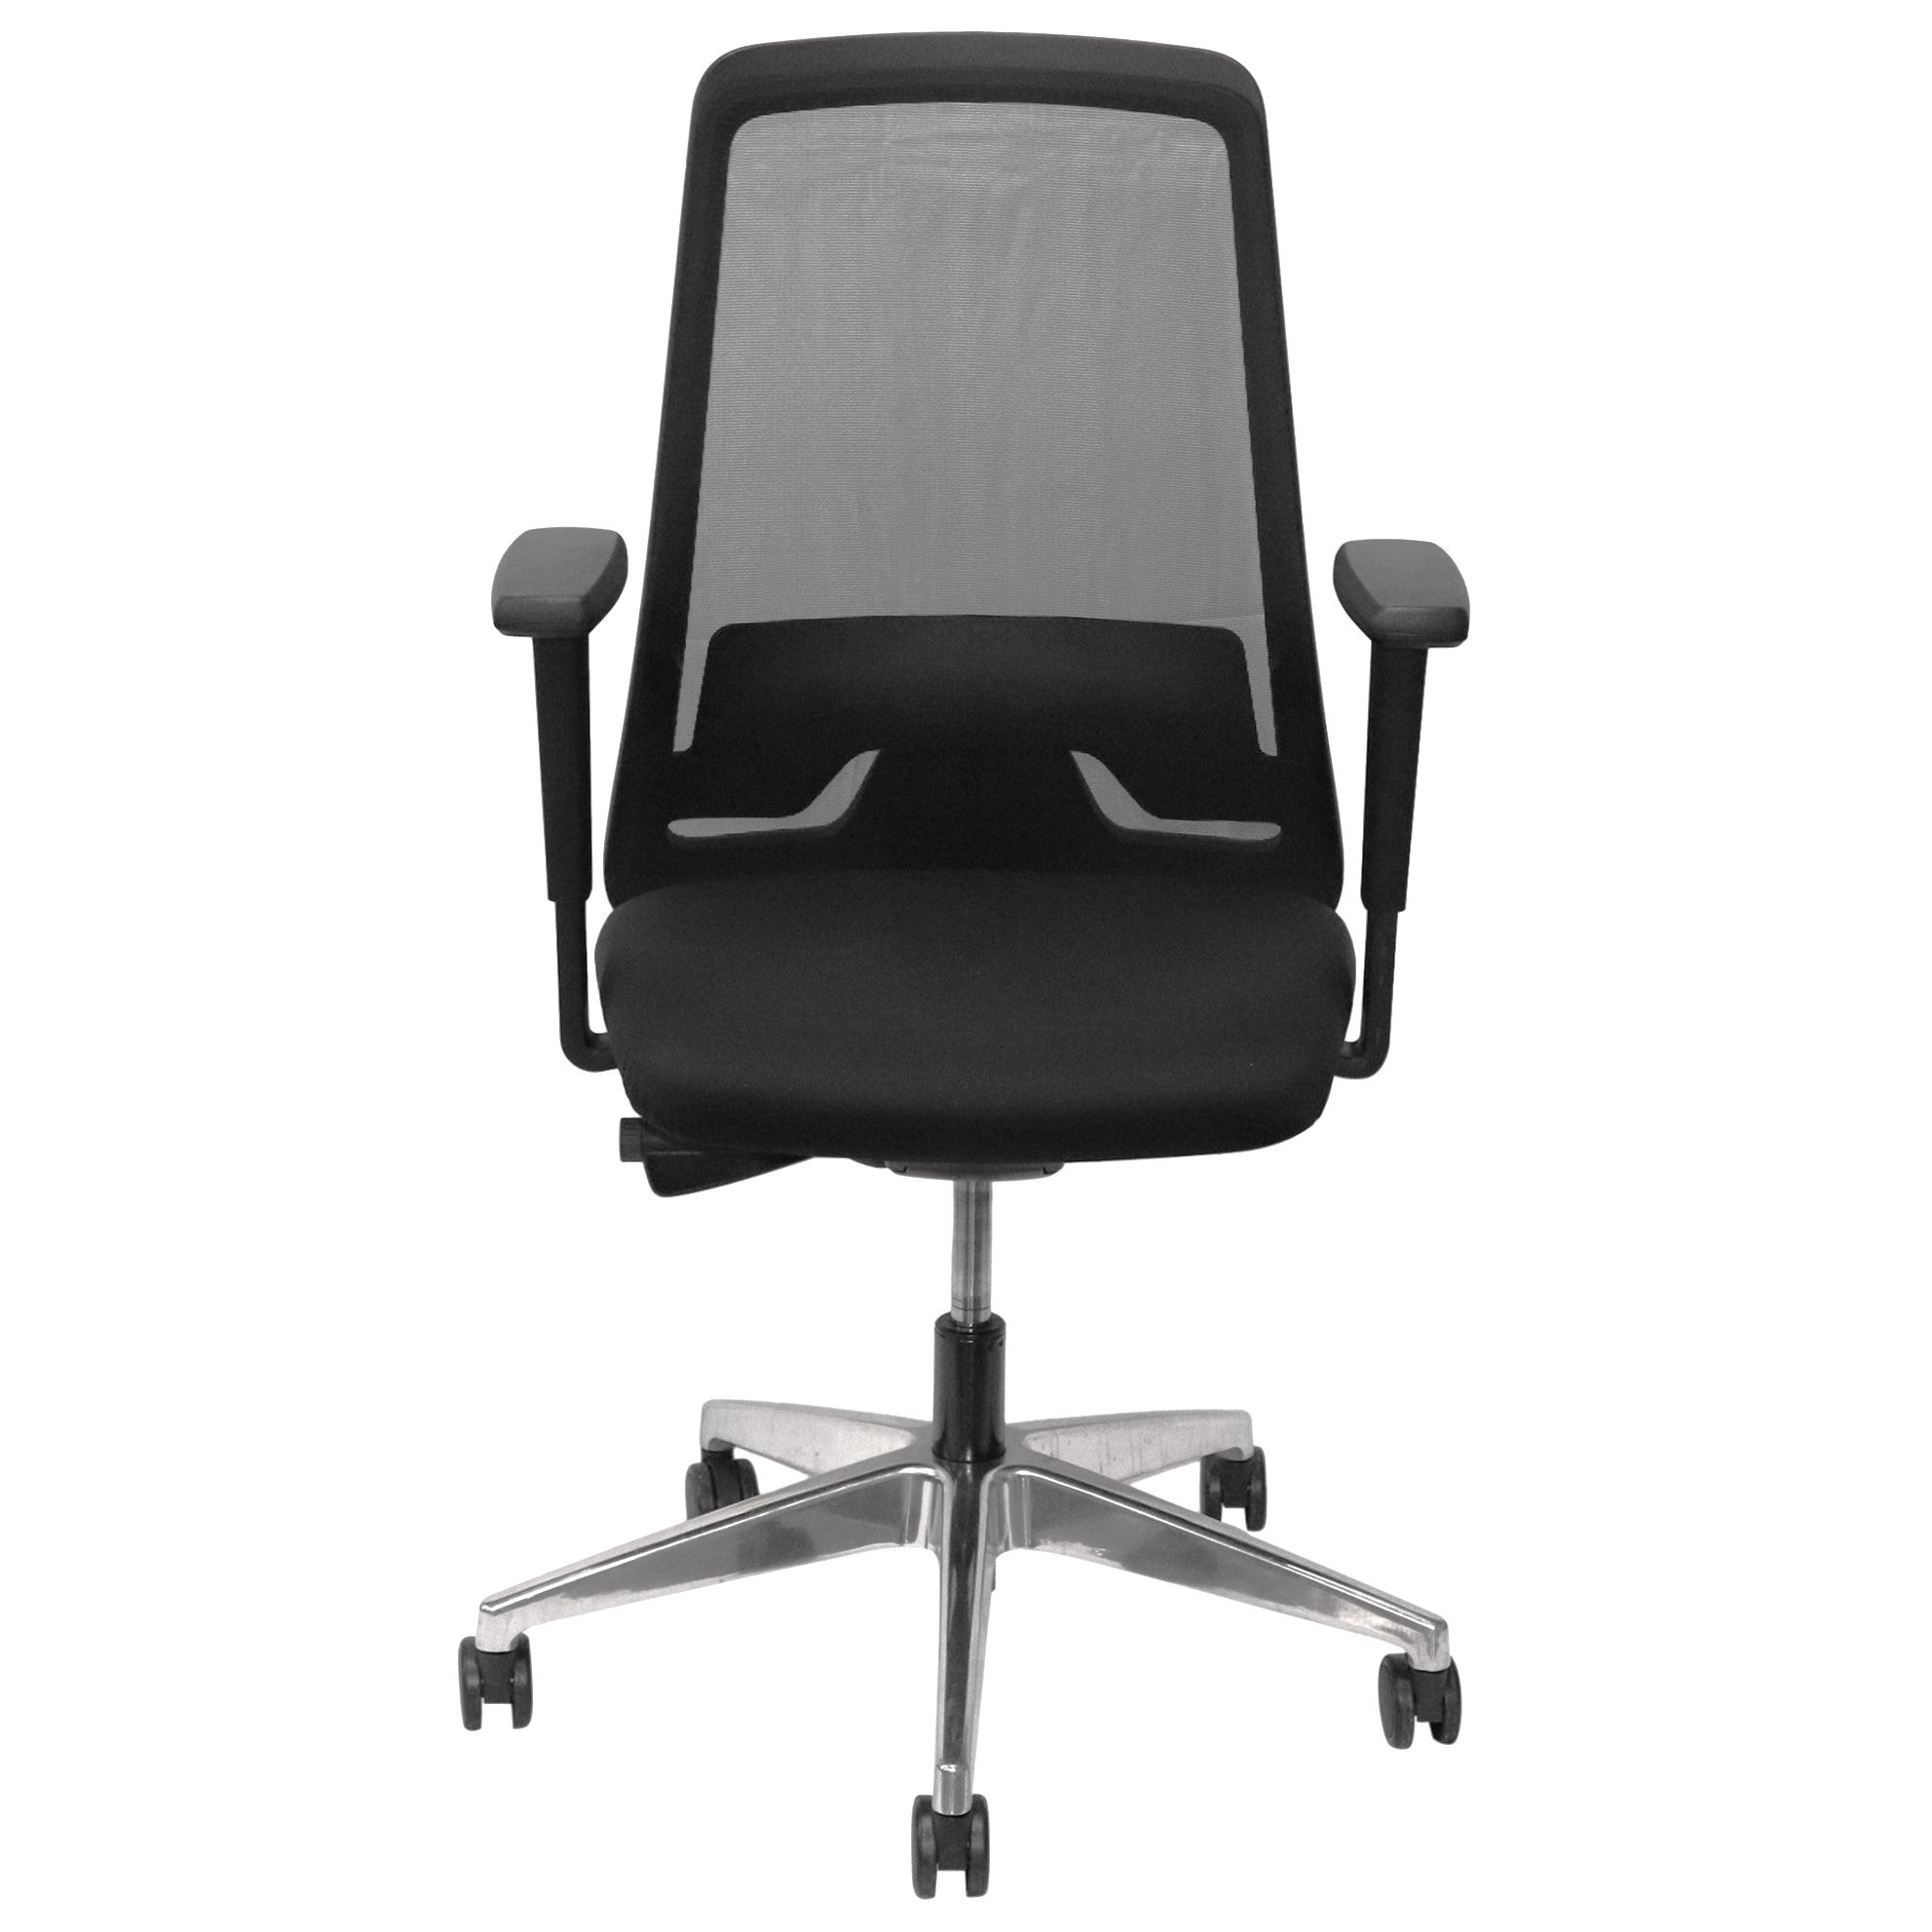 Interstuhl Every Task Chair, Black with Chrome Base - Preowned